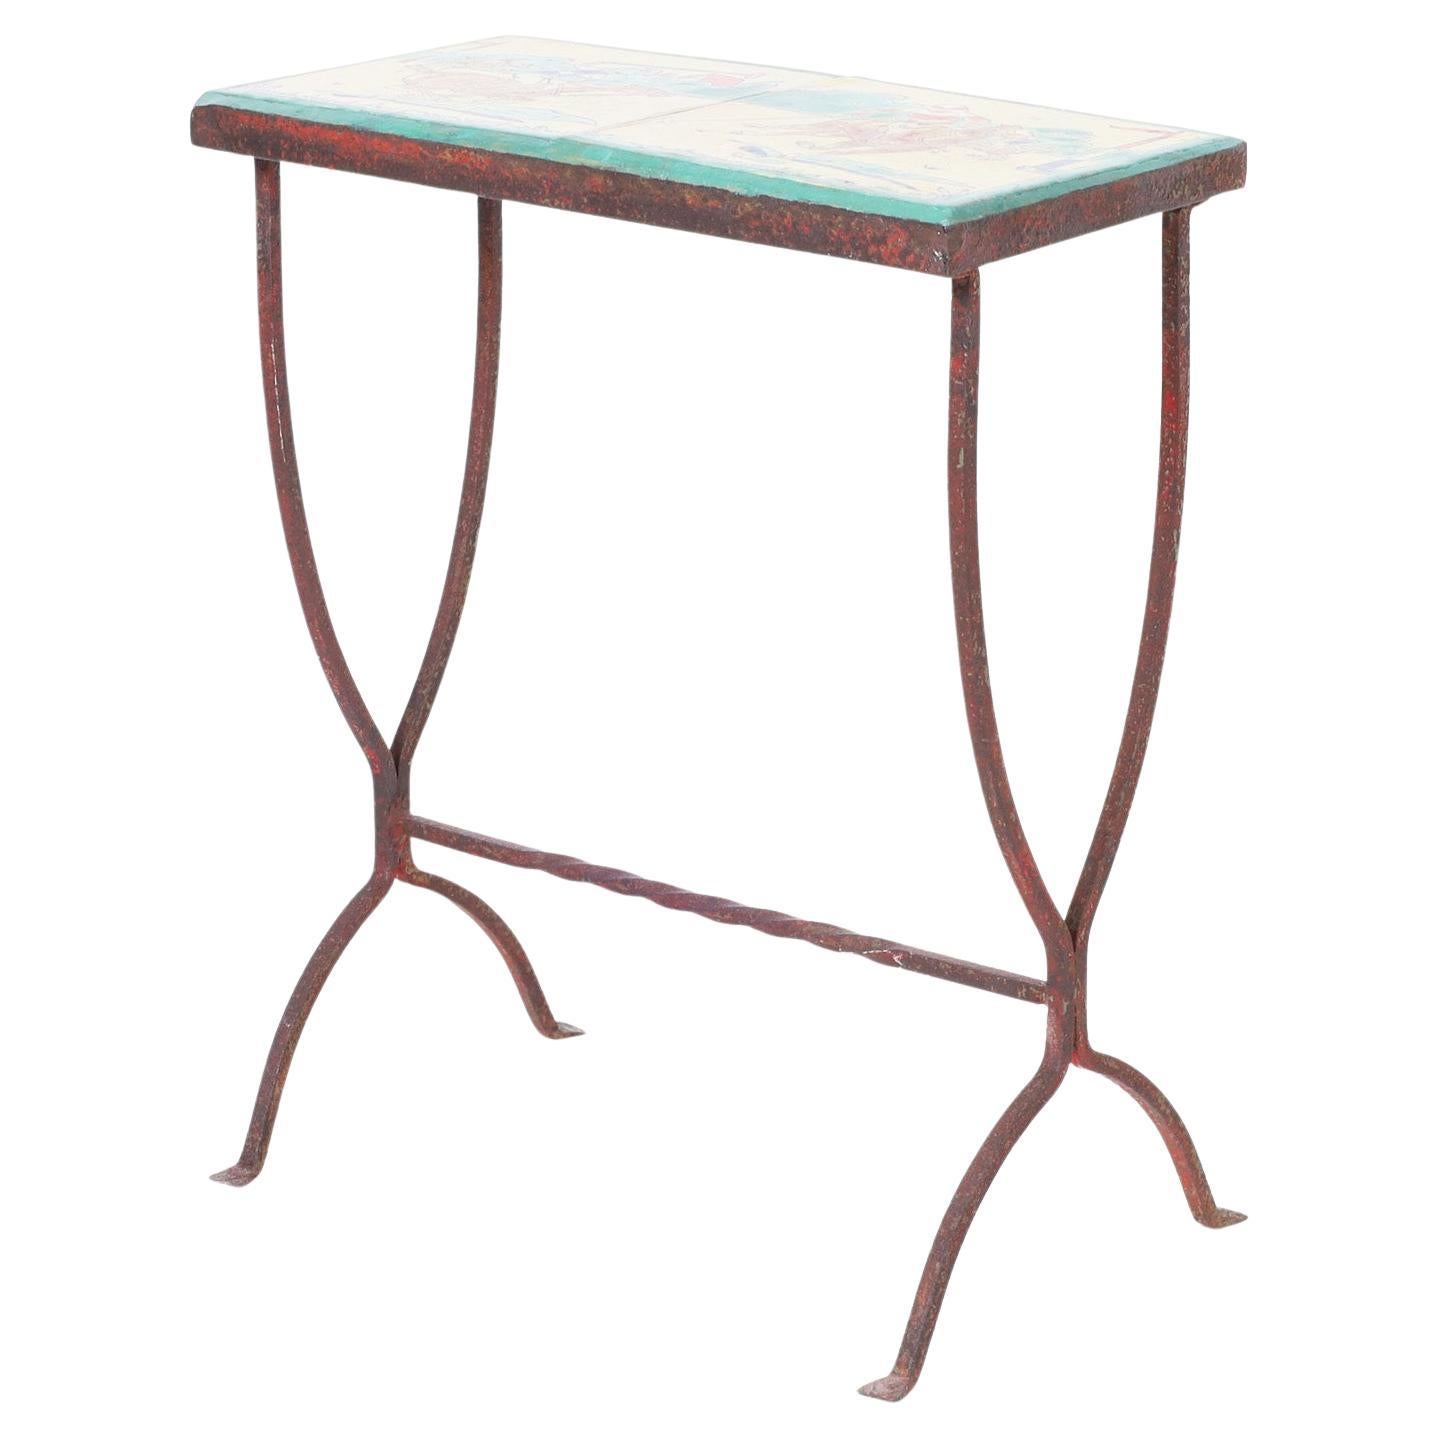 Standout antique table or stand having two polo themed arts and crafts style glazed earthenware tiles over an elegant iron base now oxidized to perfection.